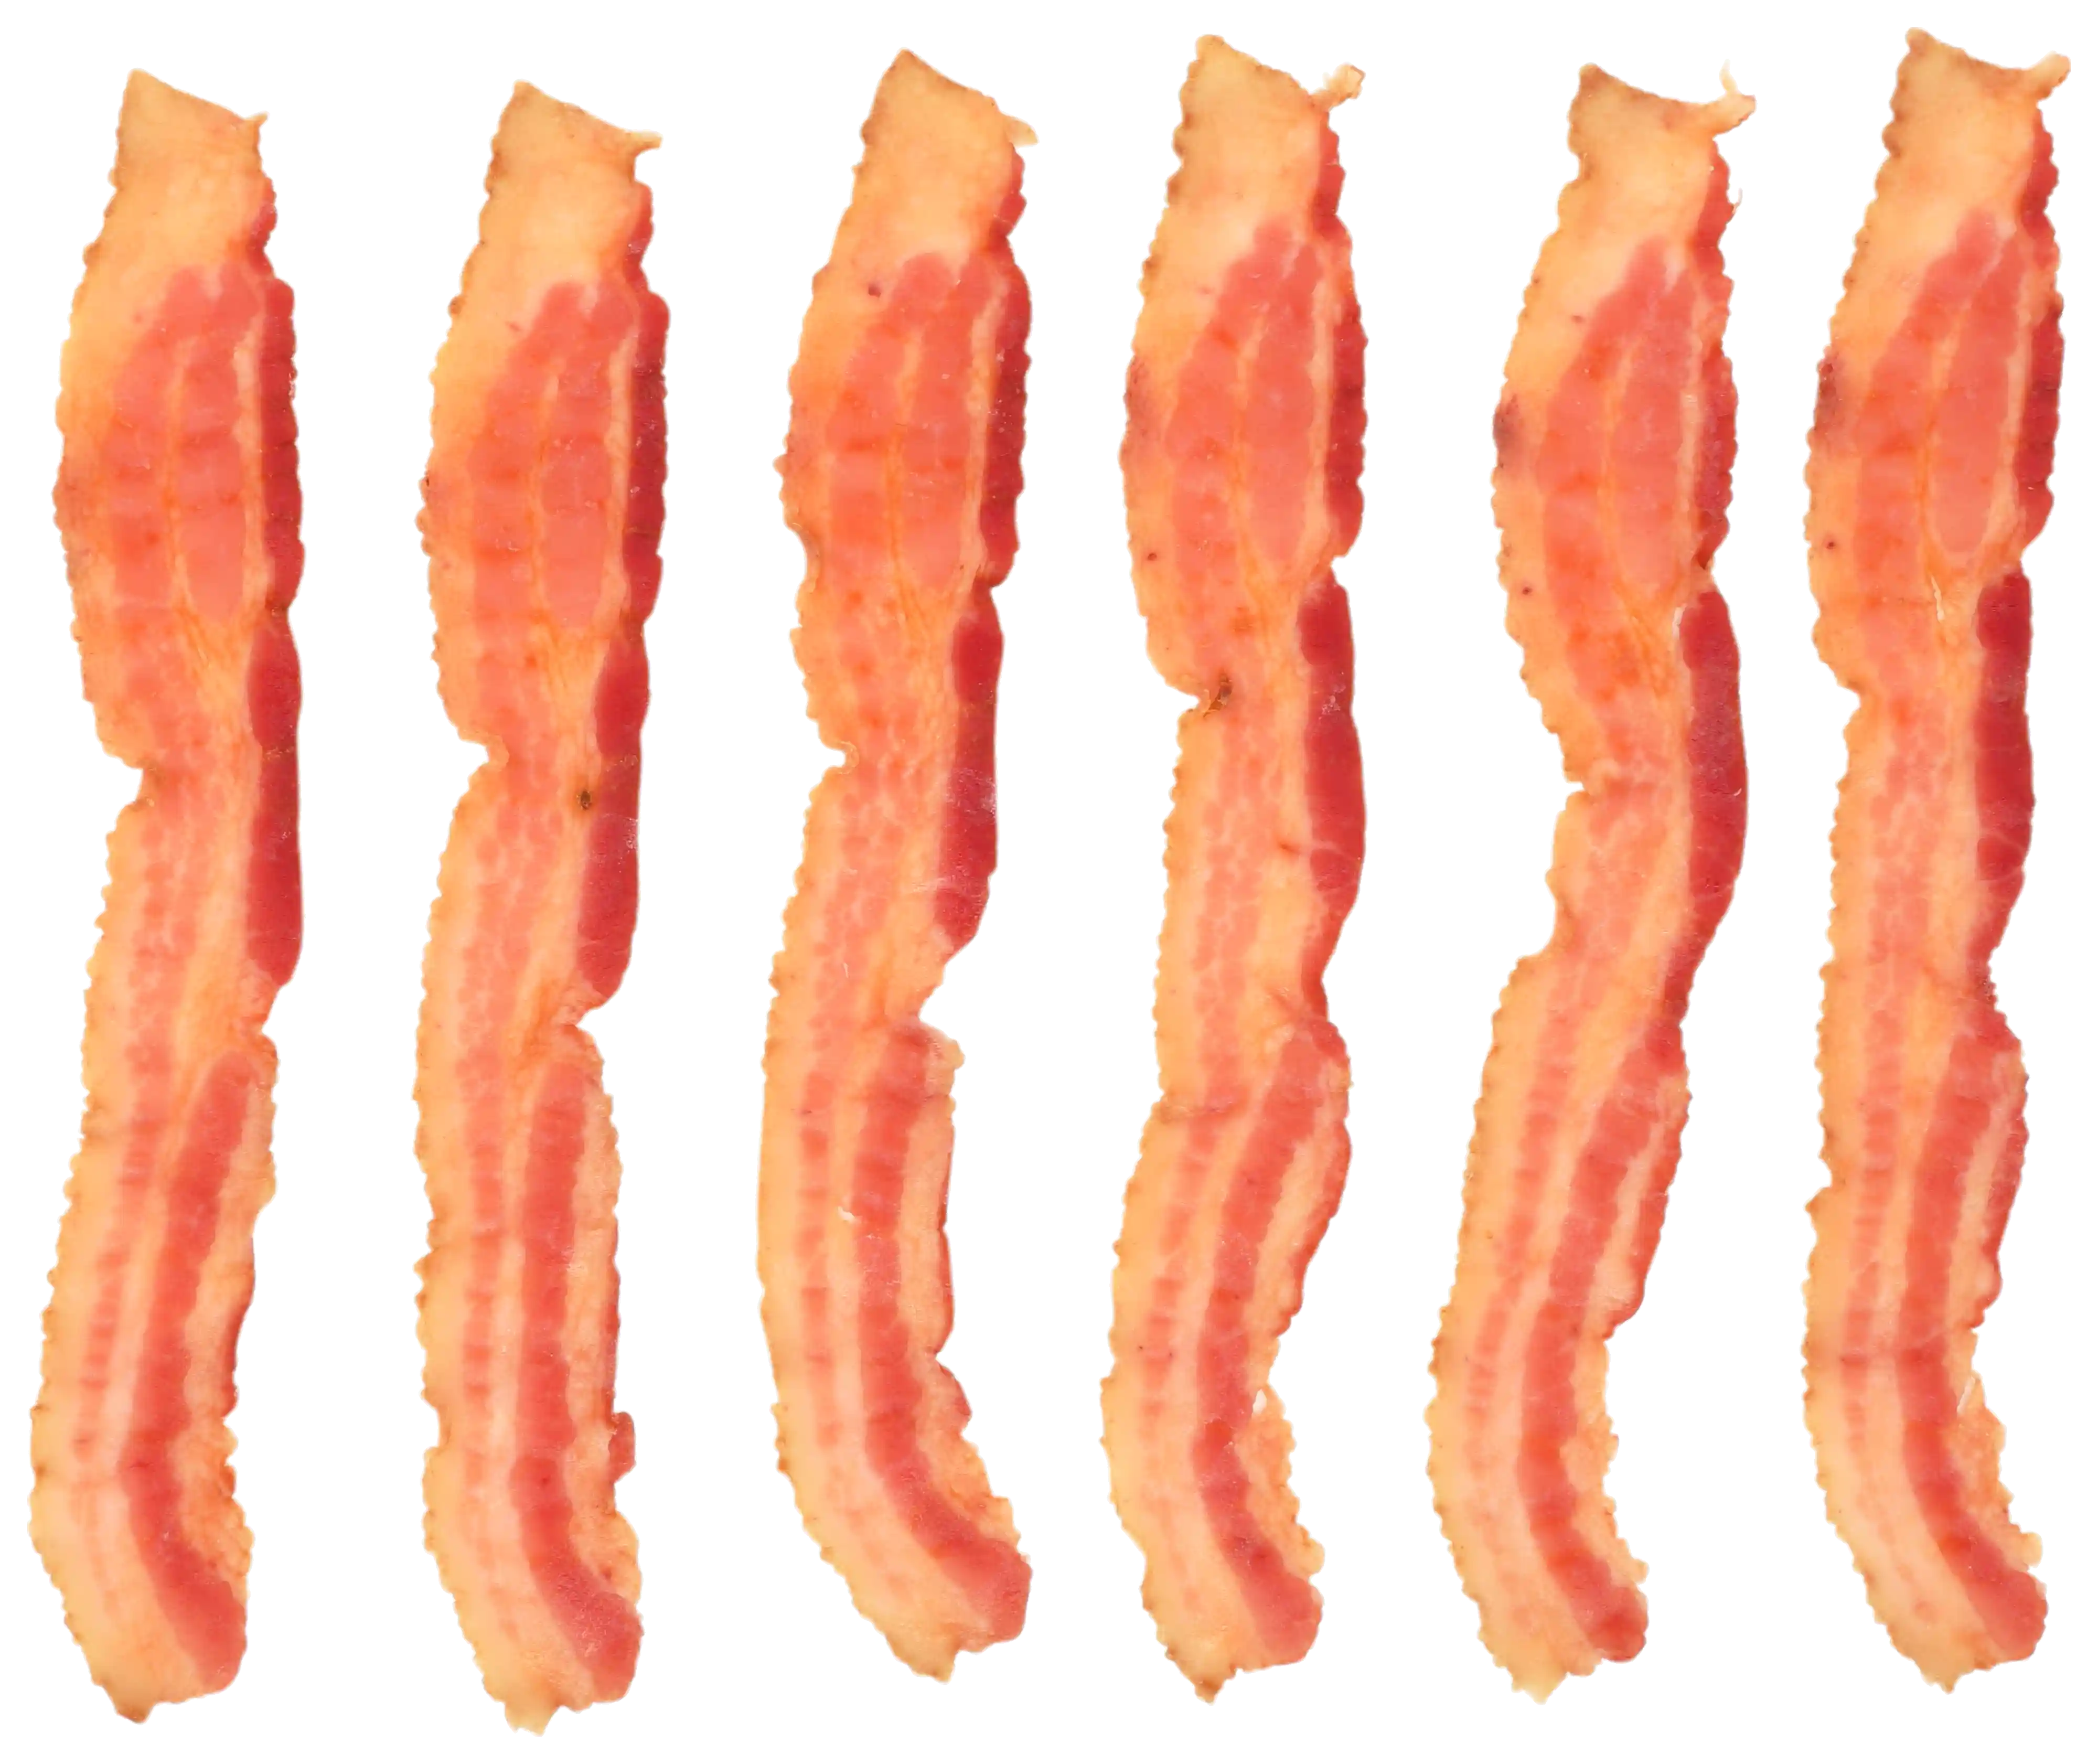 Jimmy Dean® Fully Cooked Hickory Smoked Extra Thin Bacon Slices_image_21